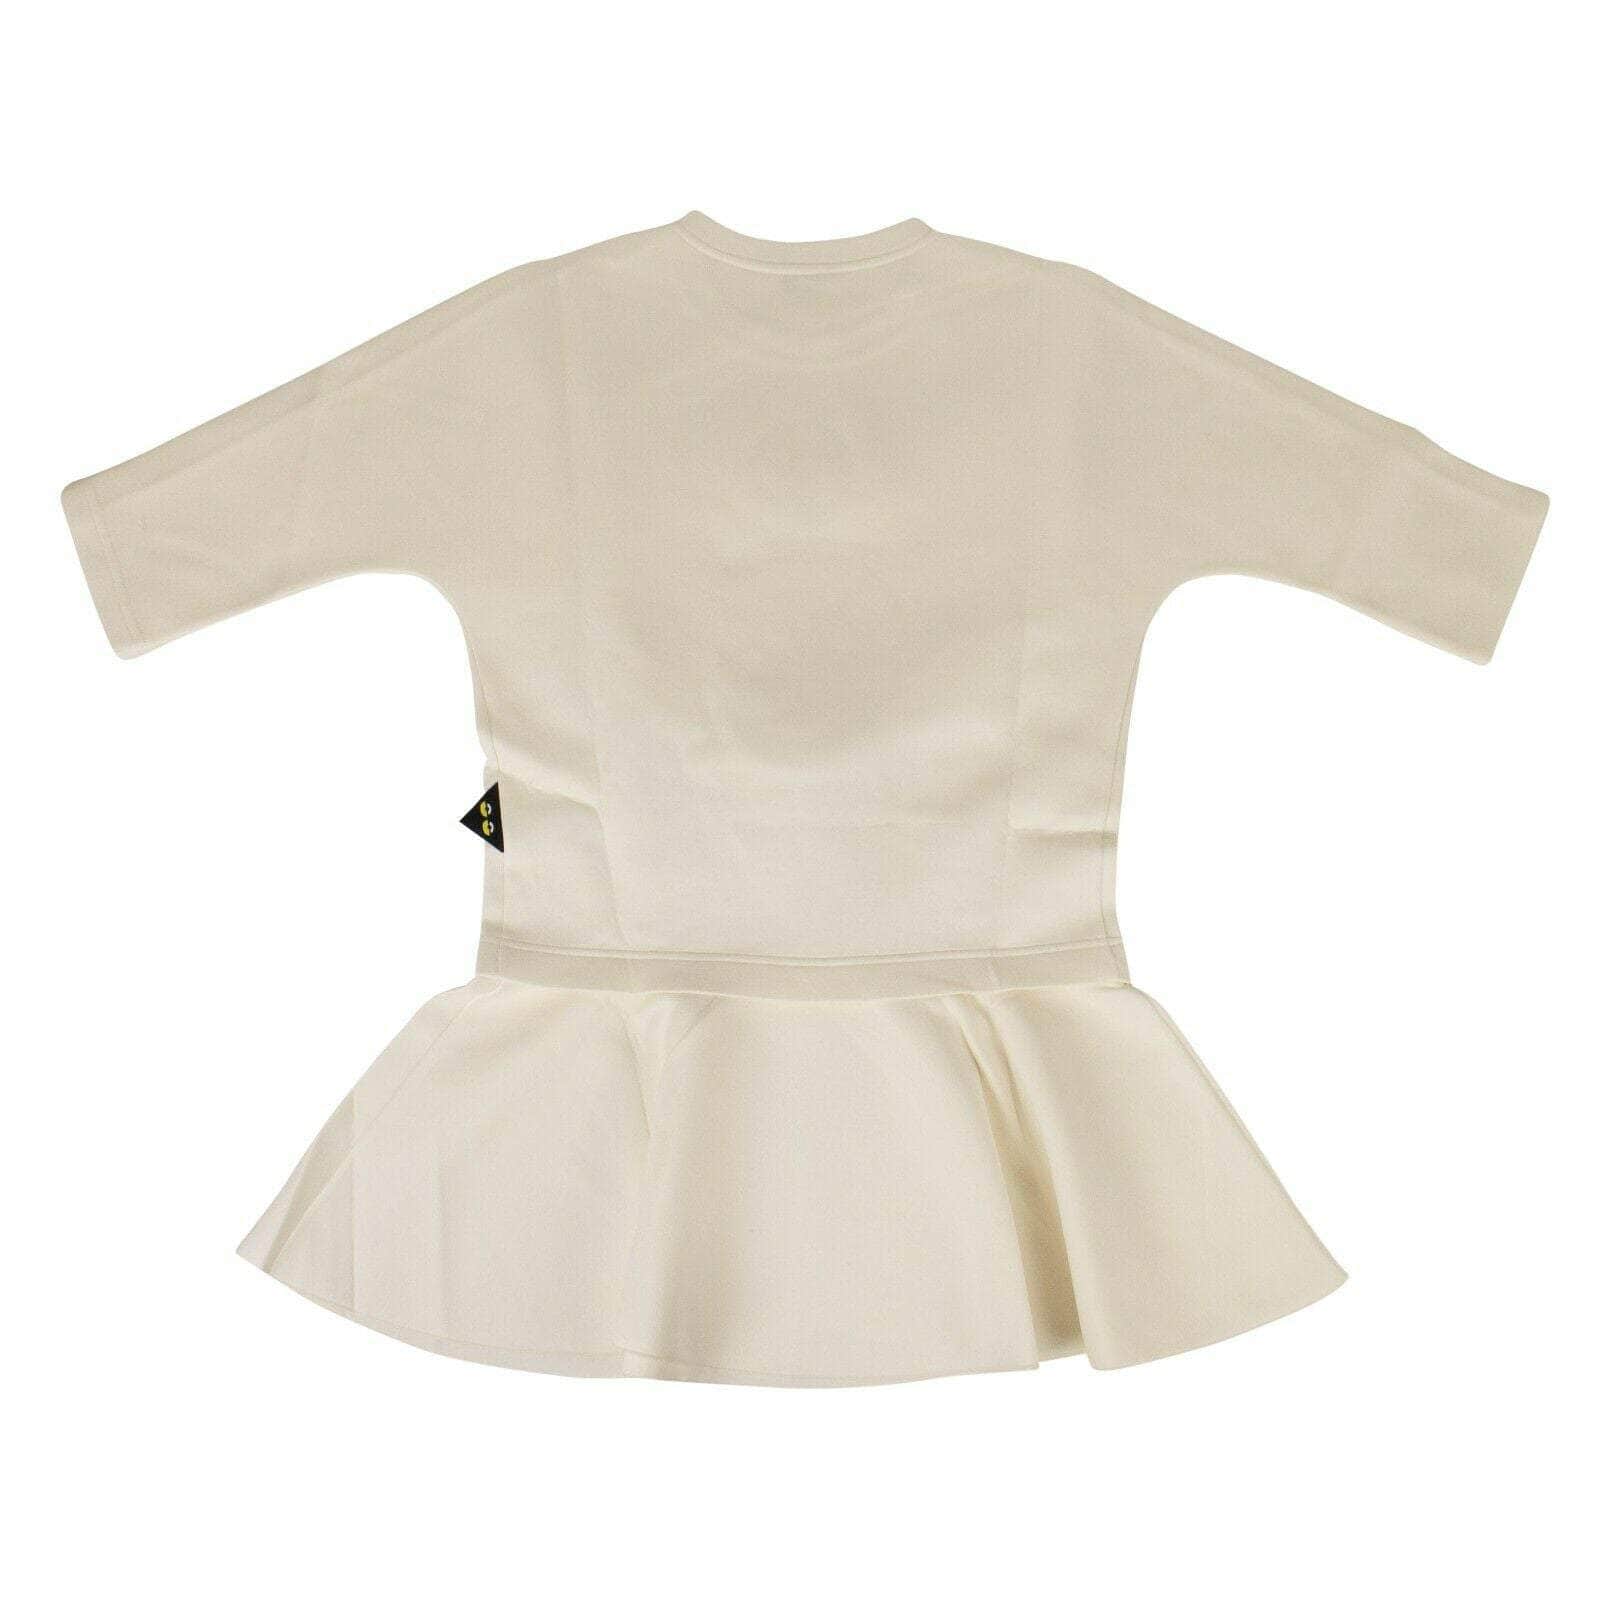 Fendi 250-500, chicmi, couponcollection, fendi, gender-womens, july4th, main-clothing, sale-enable, size-40, womens-blouses 40 Ivory Cotton Fur Bugs Peplum Top 75LE-1500/40 75LE-1500/40